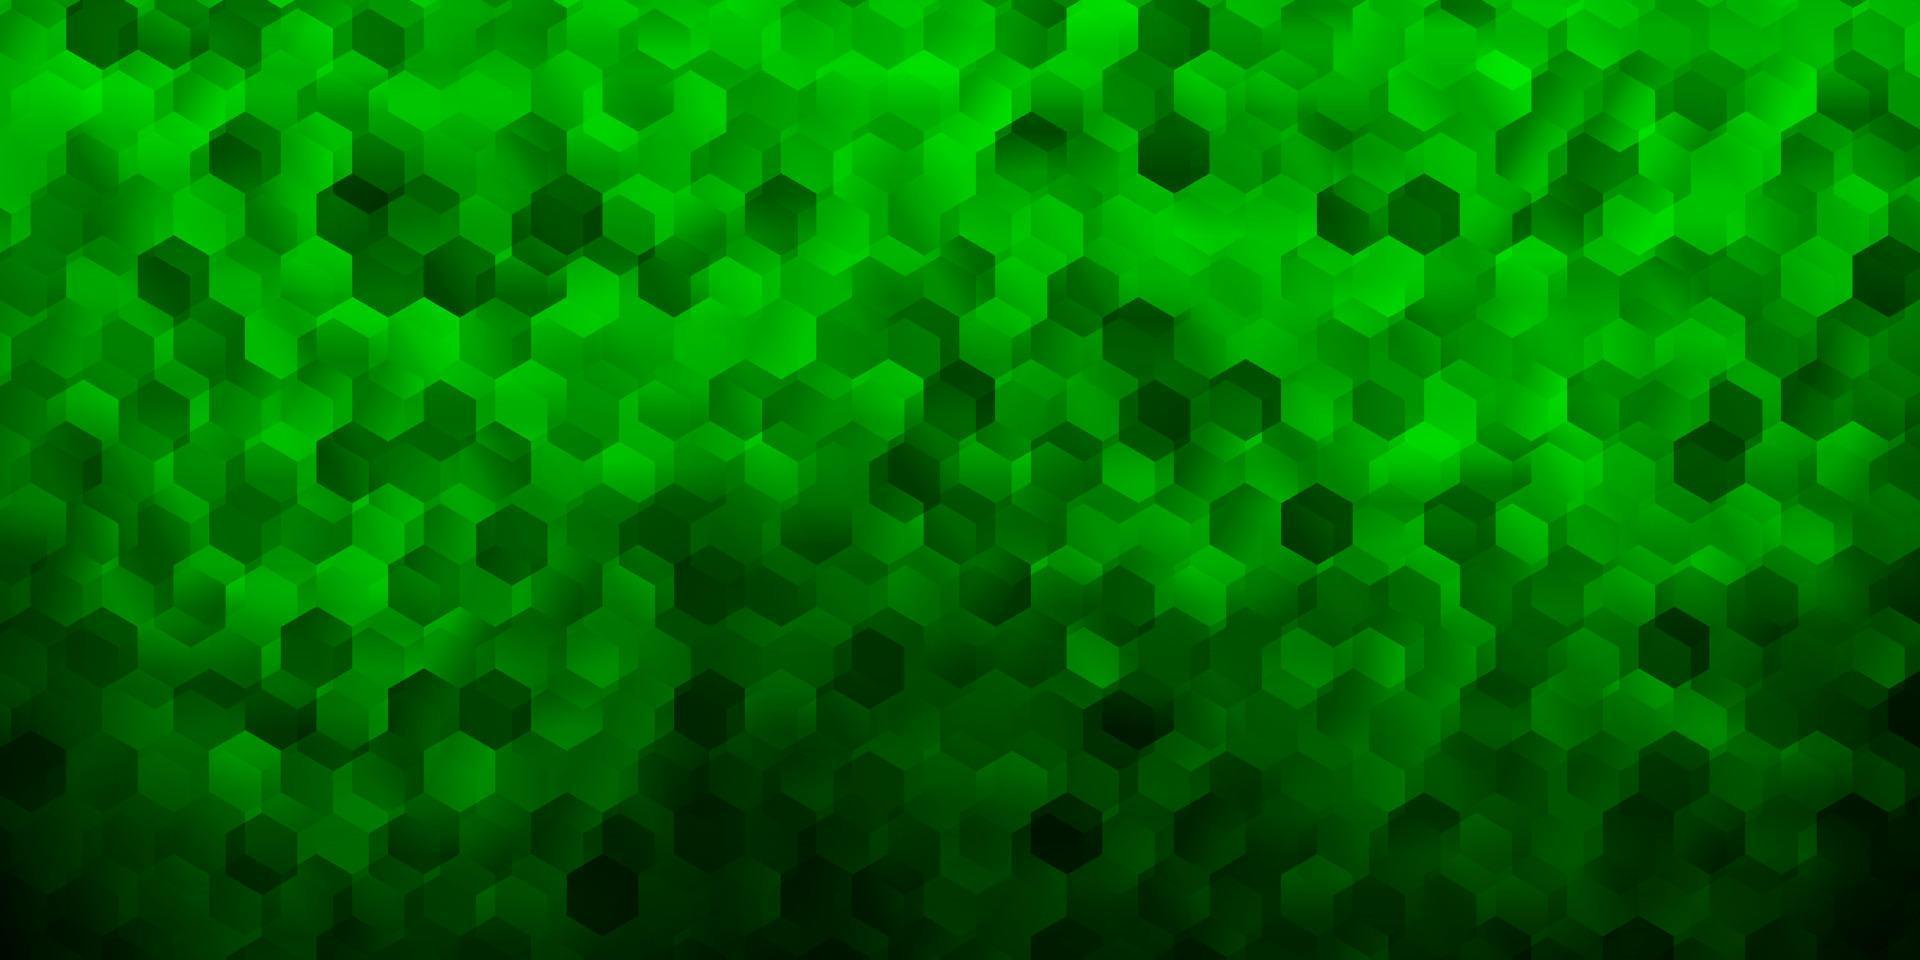 Dark green vector layout with shapes of hexagons.